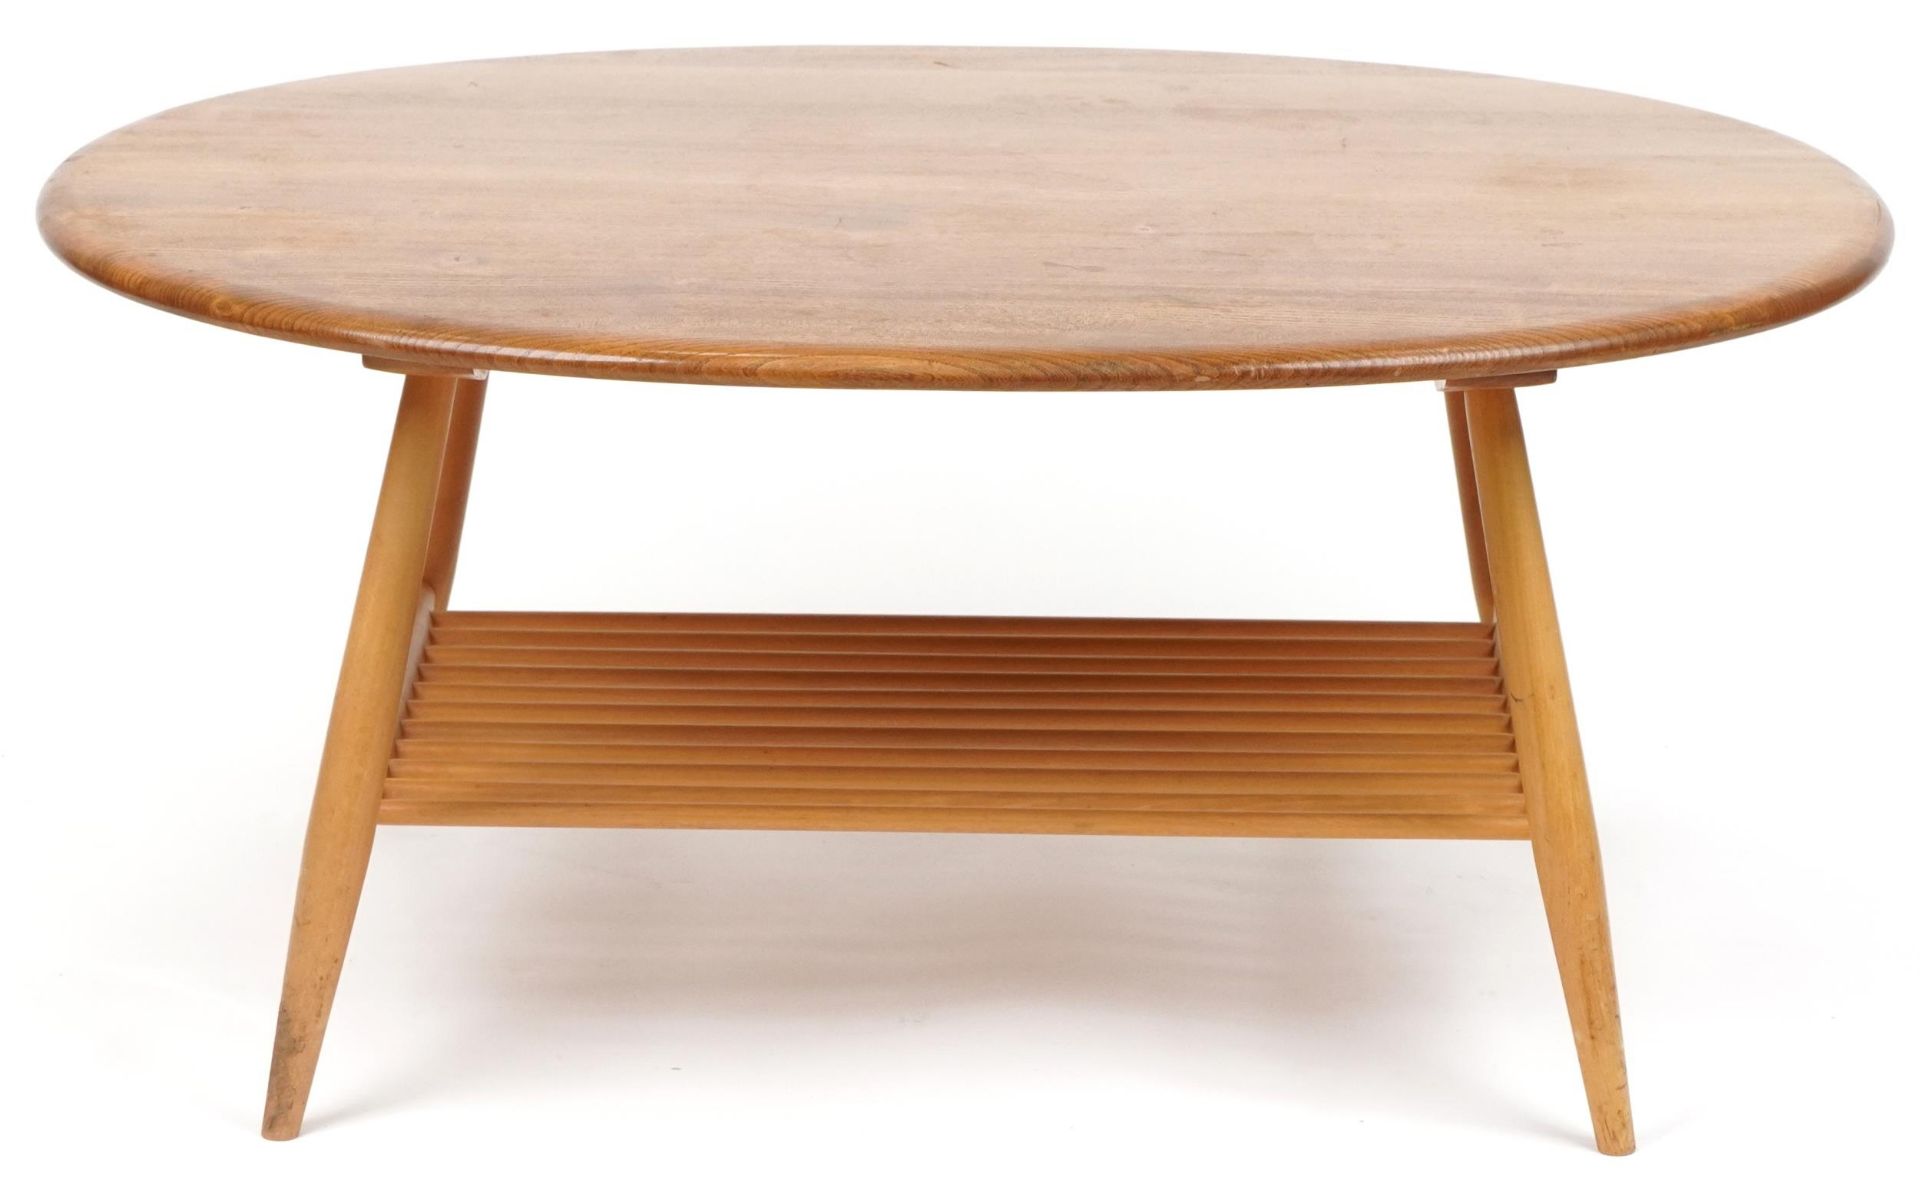 Ercol light elm coffee table with oval top, 44cm H x 99cm W x 82cm D - Image 2 of 5